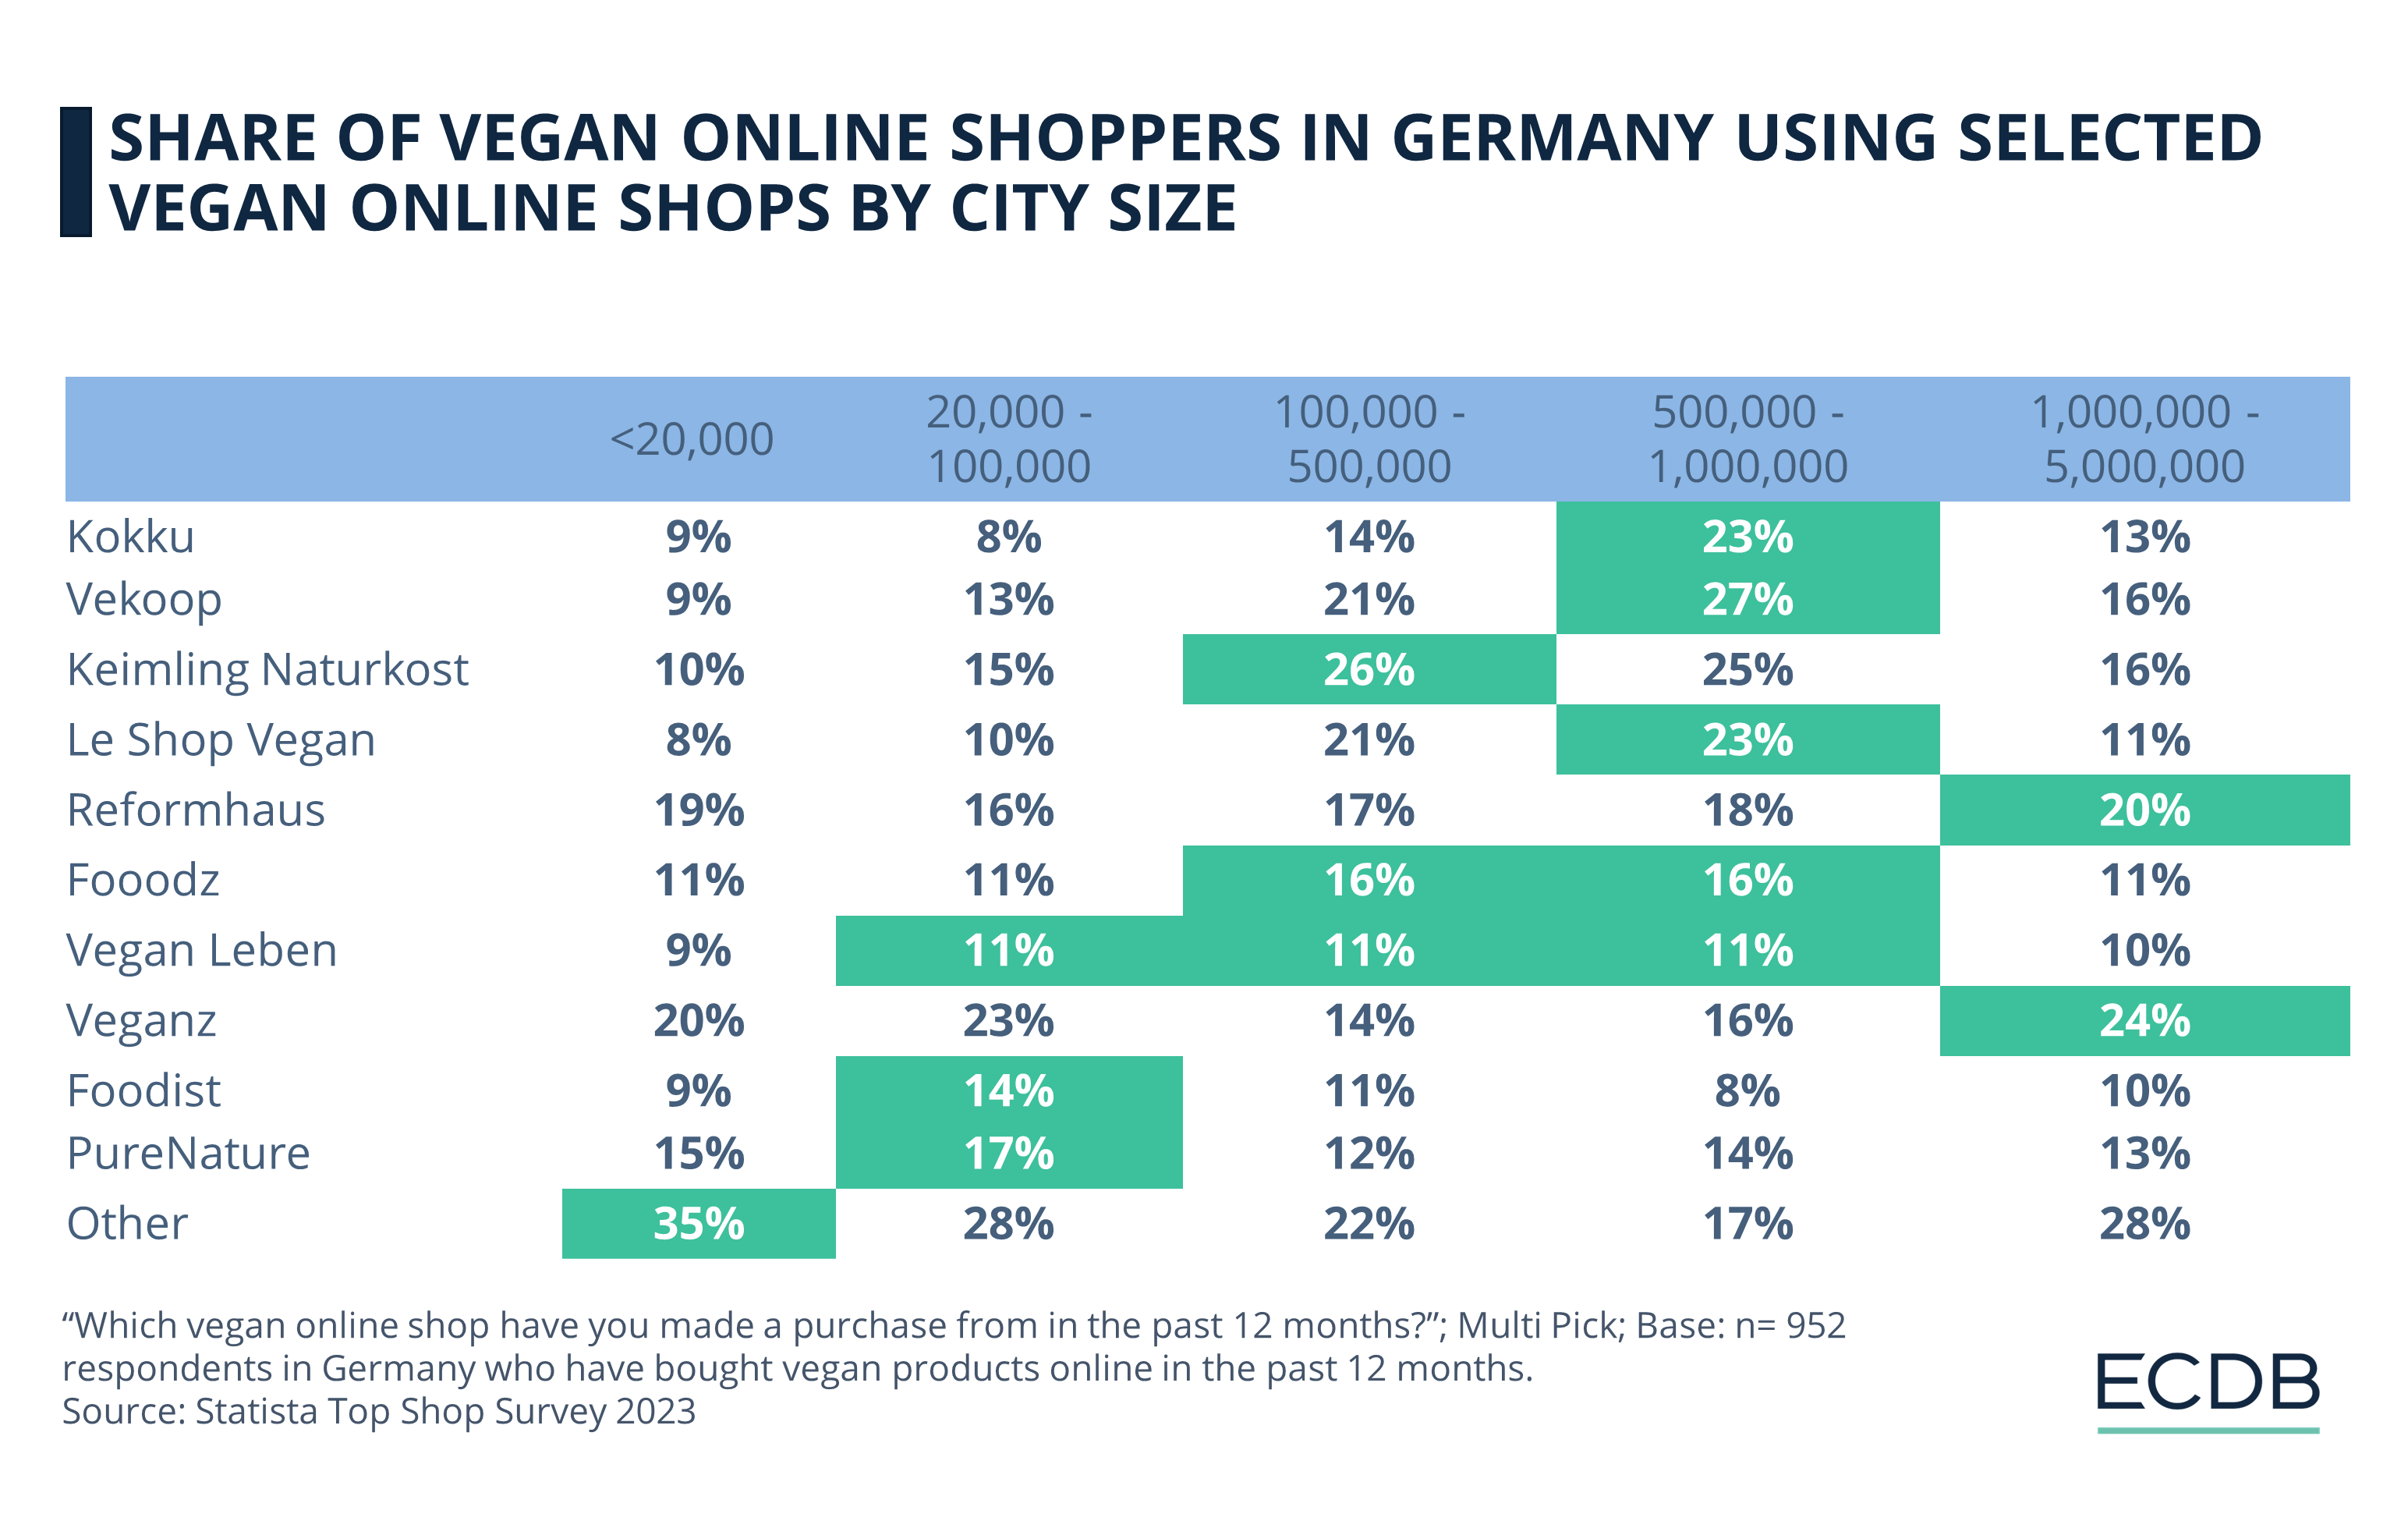 Share of Vegan Online Shoppers in Germany Using Selected Vegan Online Shops by City Size